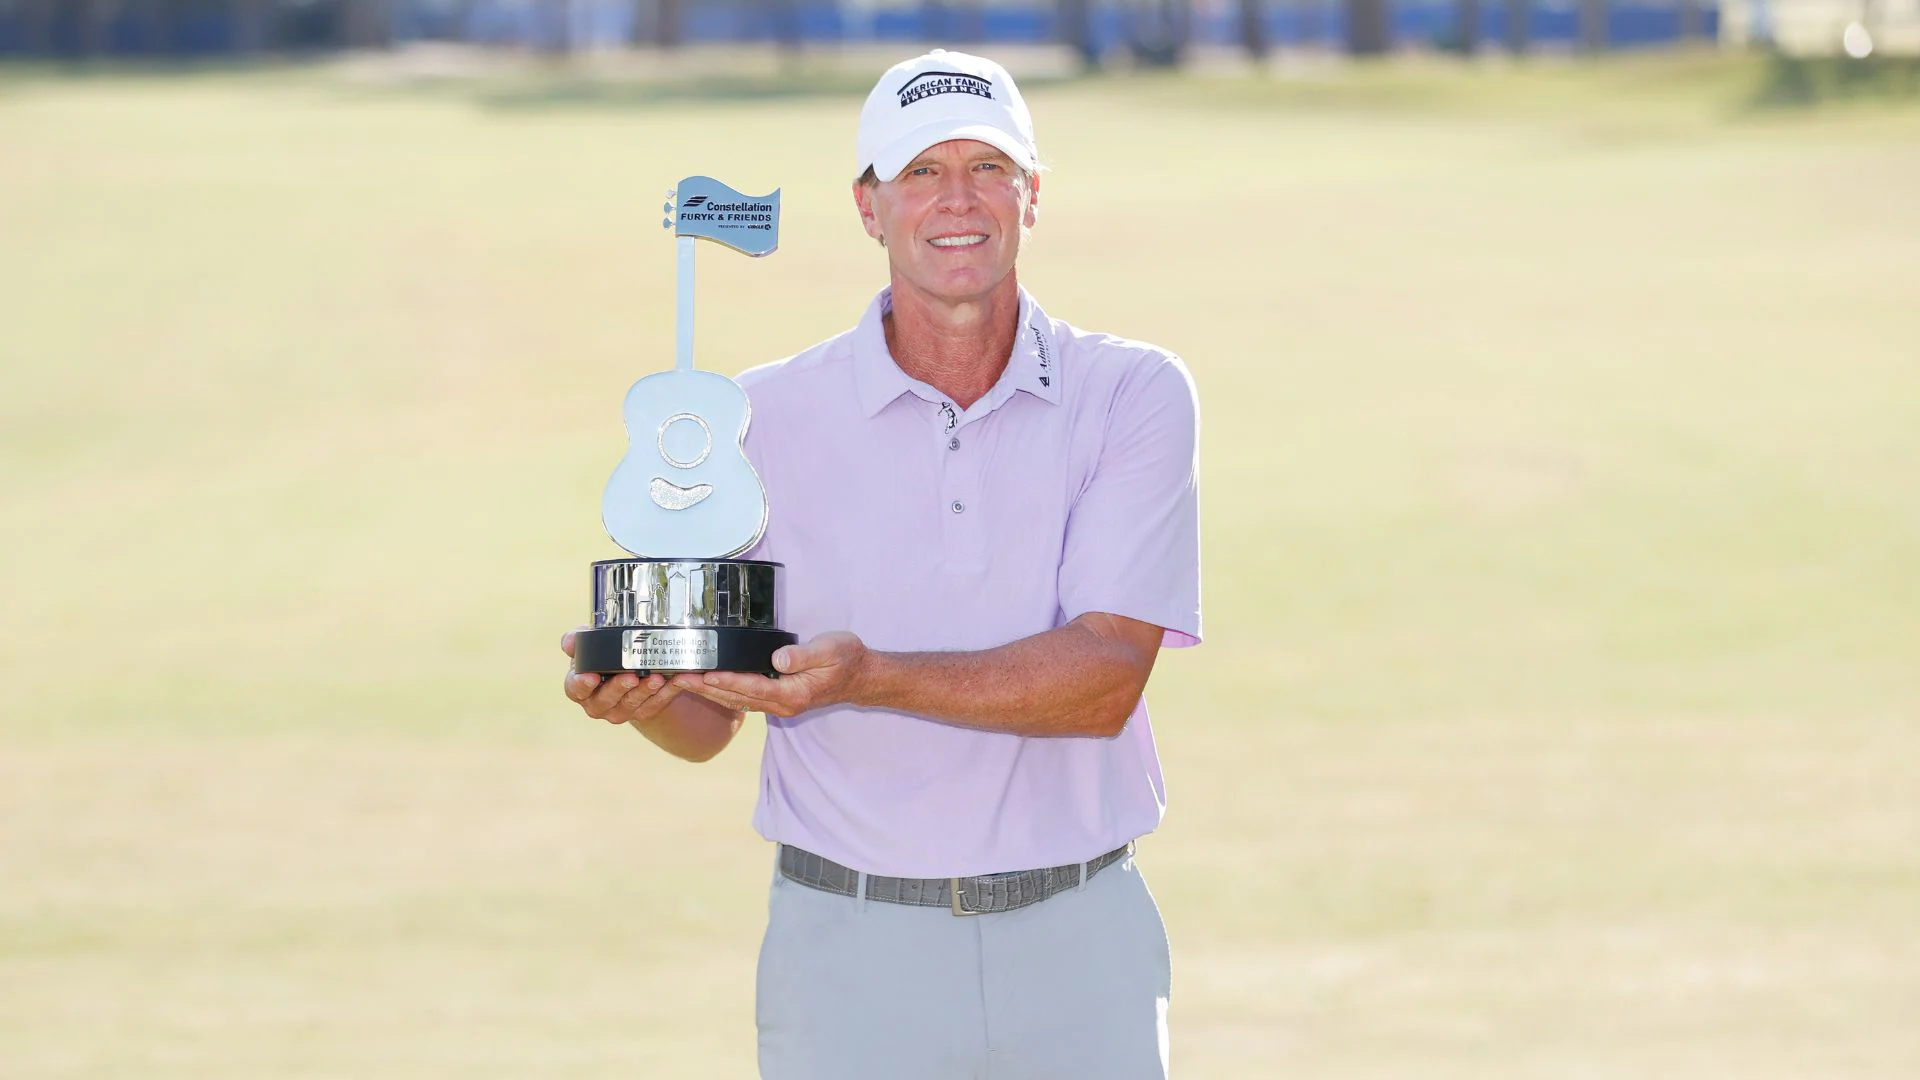 Steve Stricker wins Constellation Furyk & Friends, his fourth PGA Tour Champions title this year